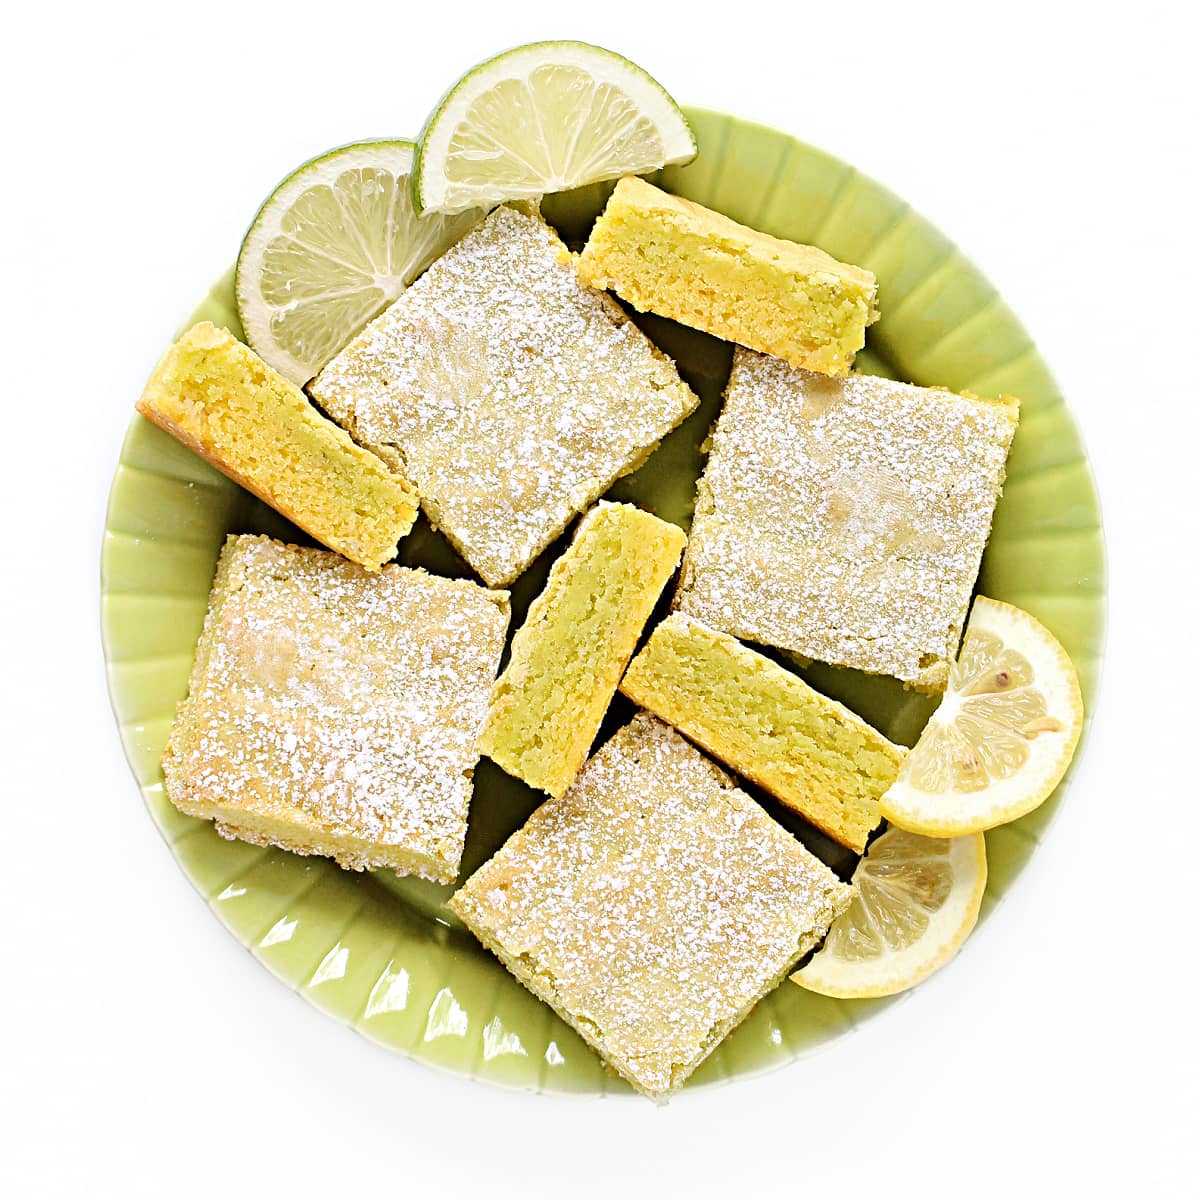 Lemon-Lime Bars on a serving plate showing powdered sugar tops and two layer cut edges.